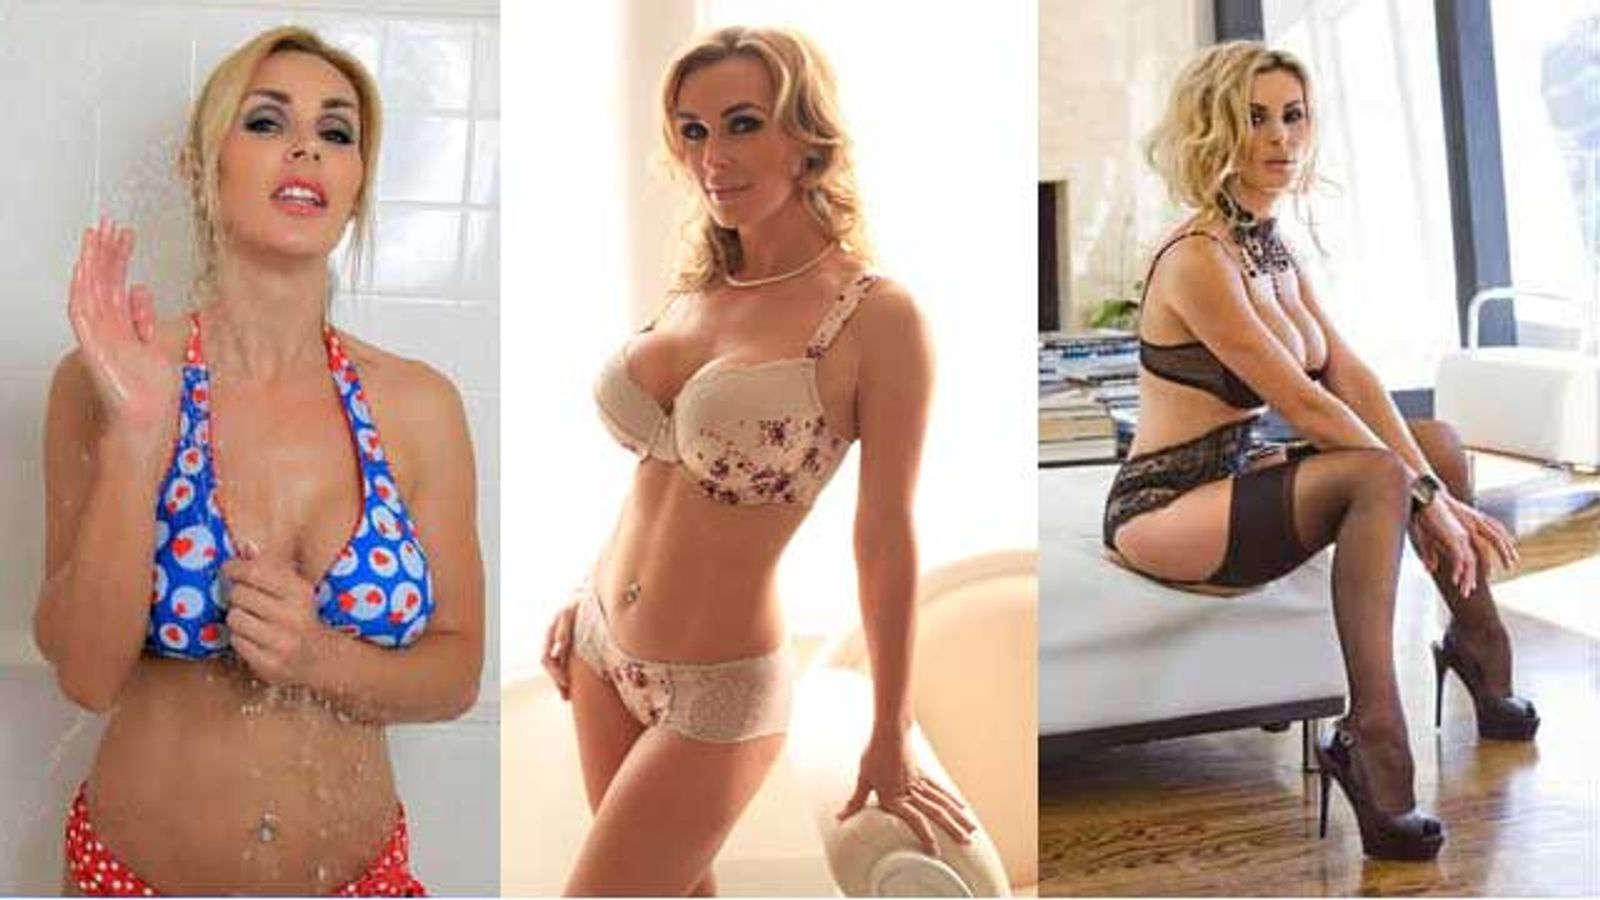 Fans Nominate UK Adult Star Tanya Tate For Two Fanny Awards